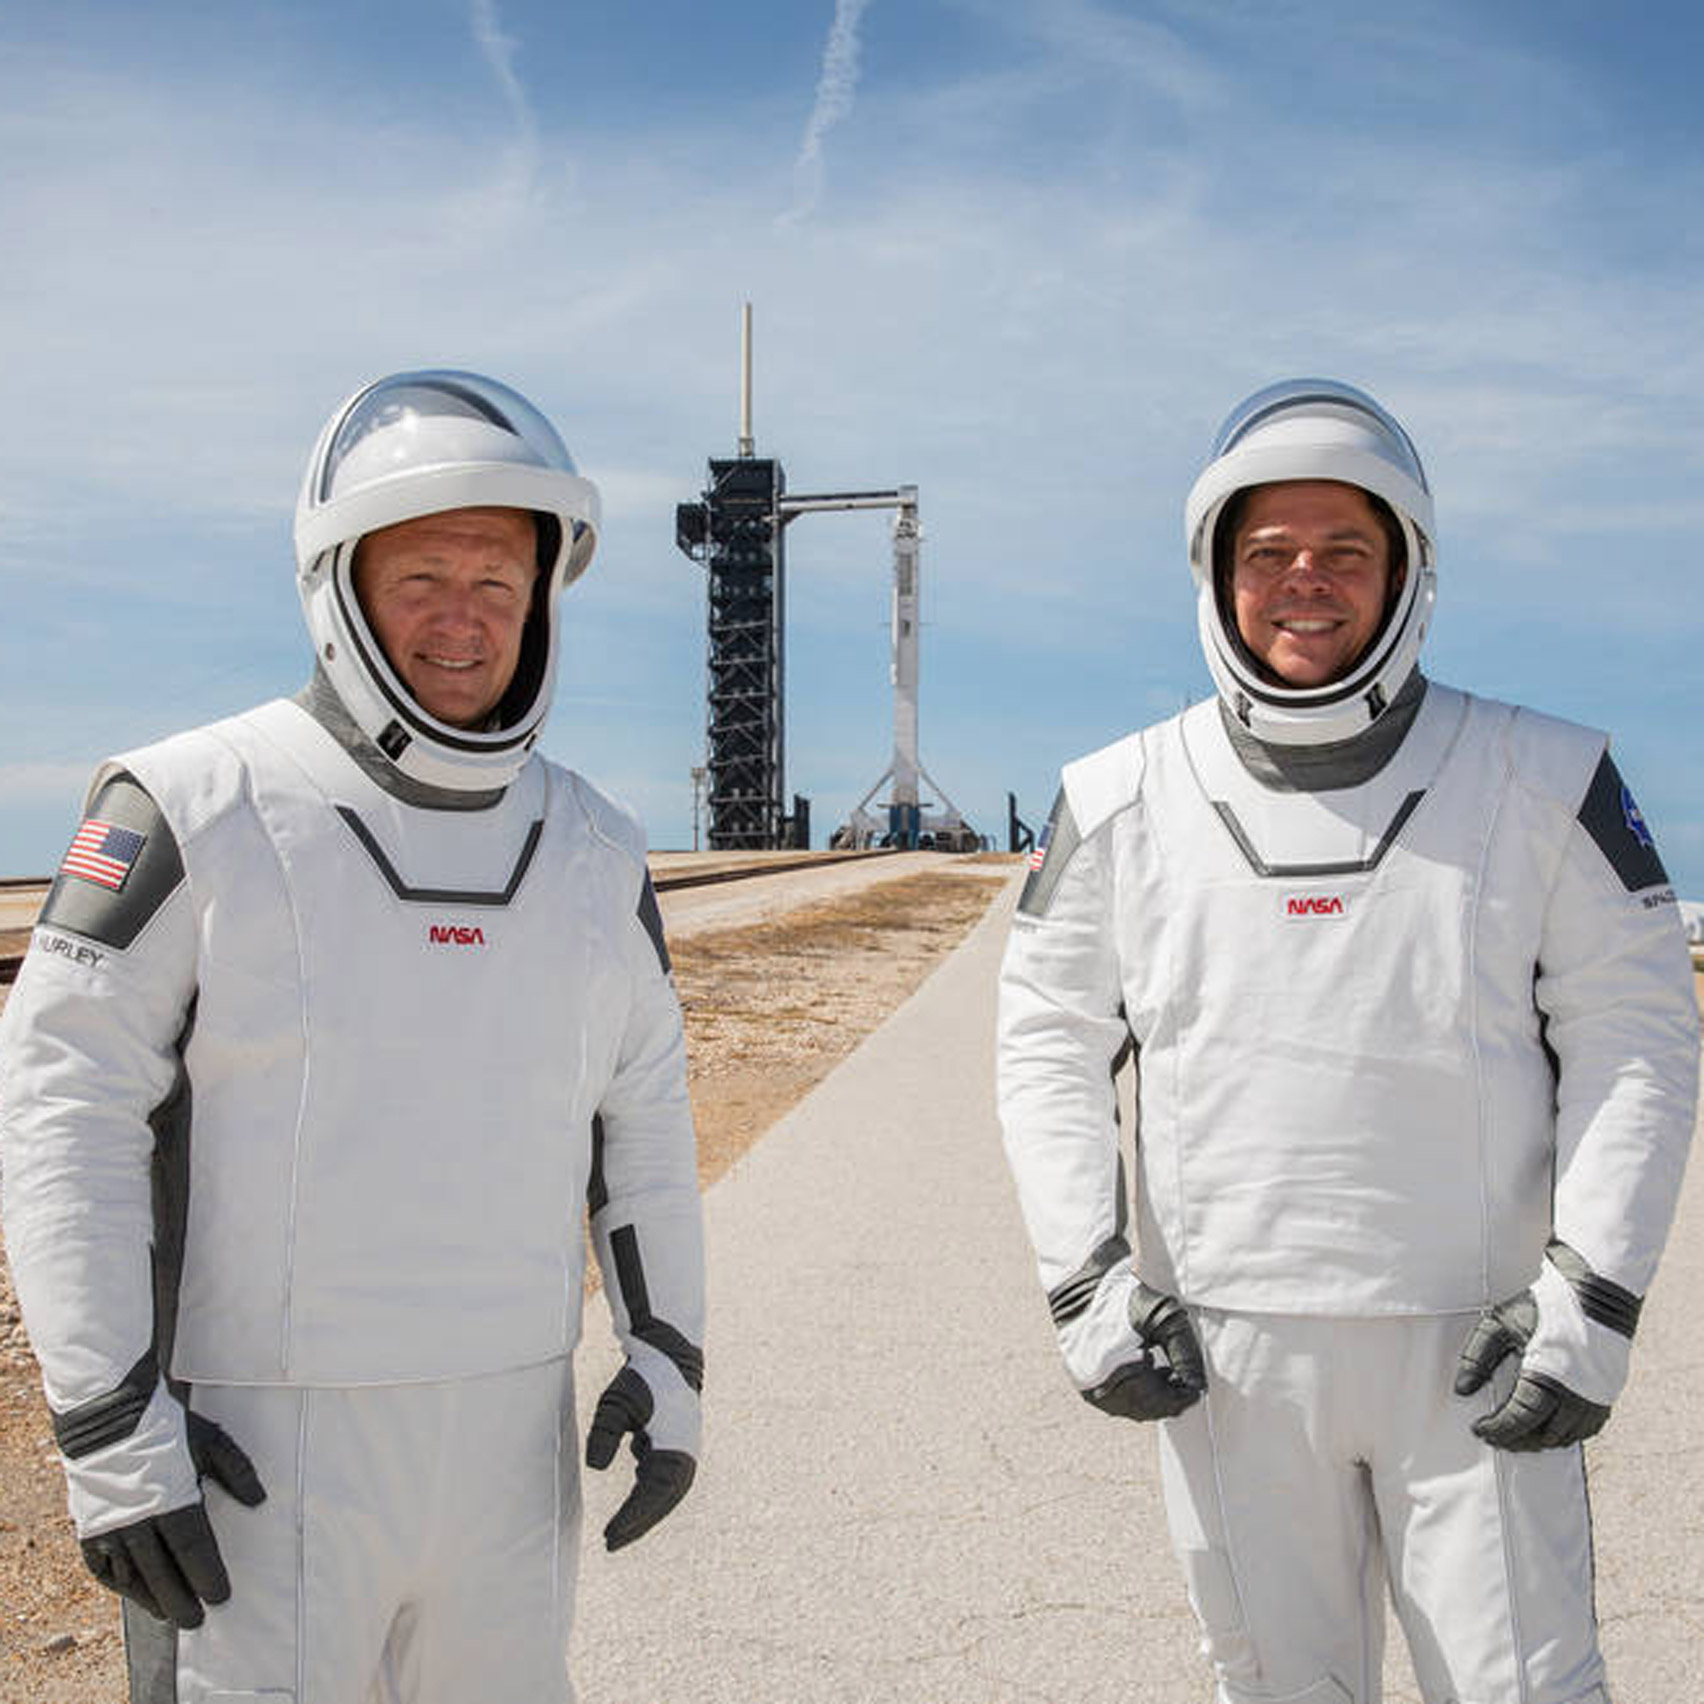 NASA revives “worm” logo and debuts SpaceX spacesuits